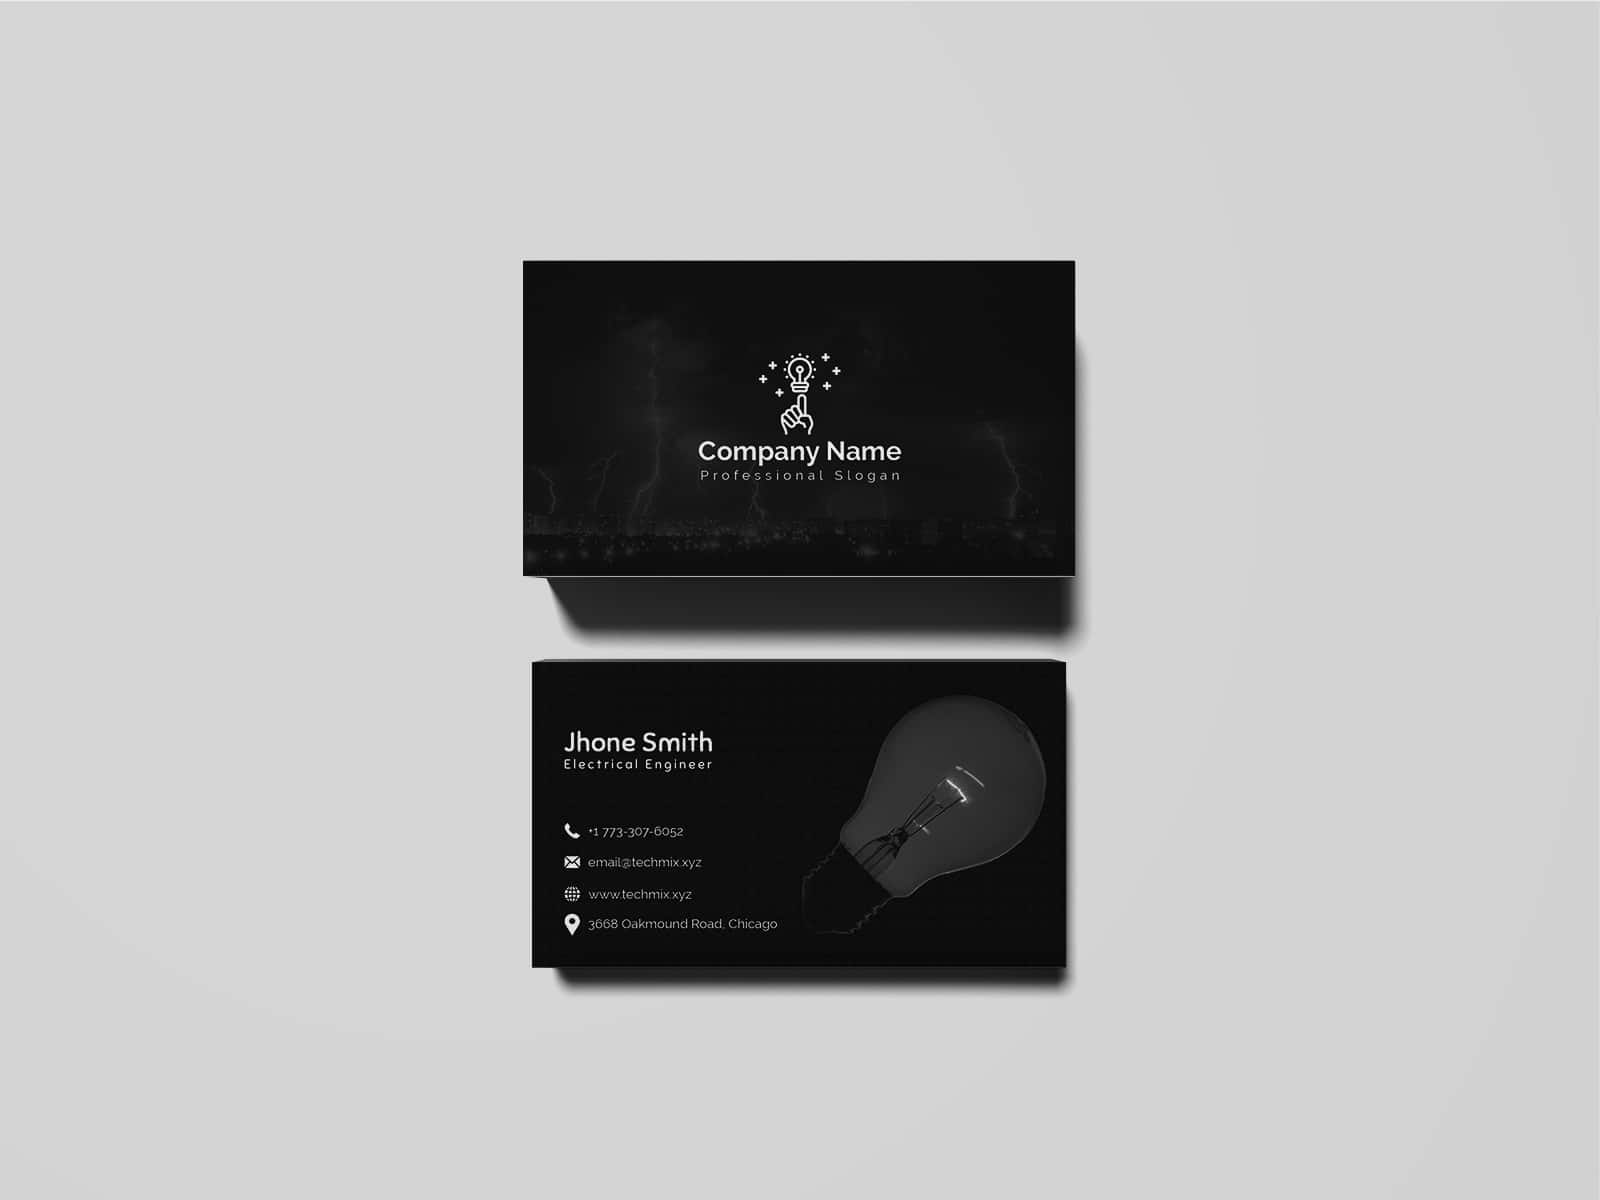 Electrical Engineer Business Card Template